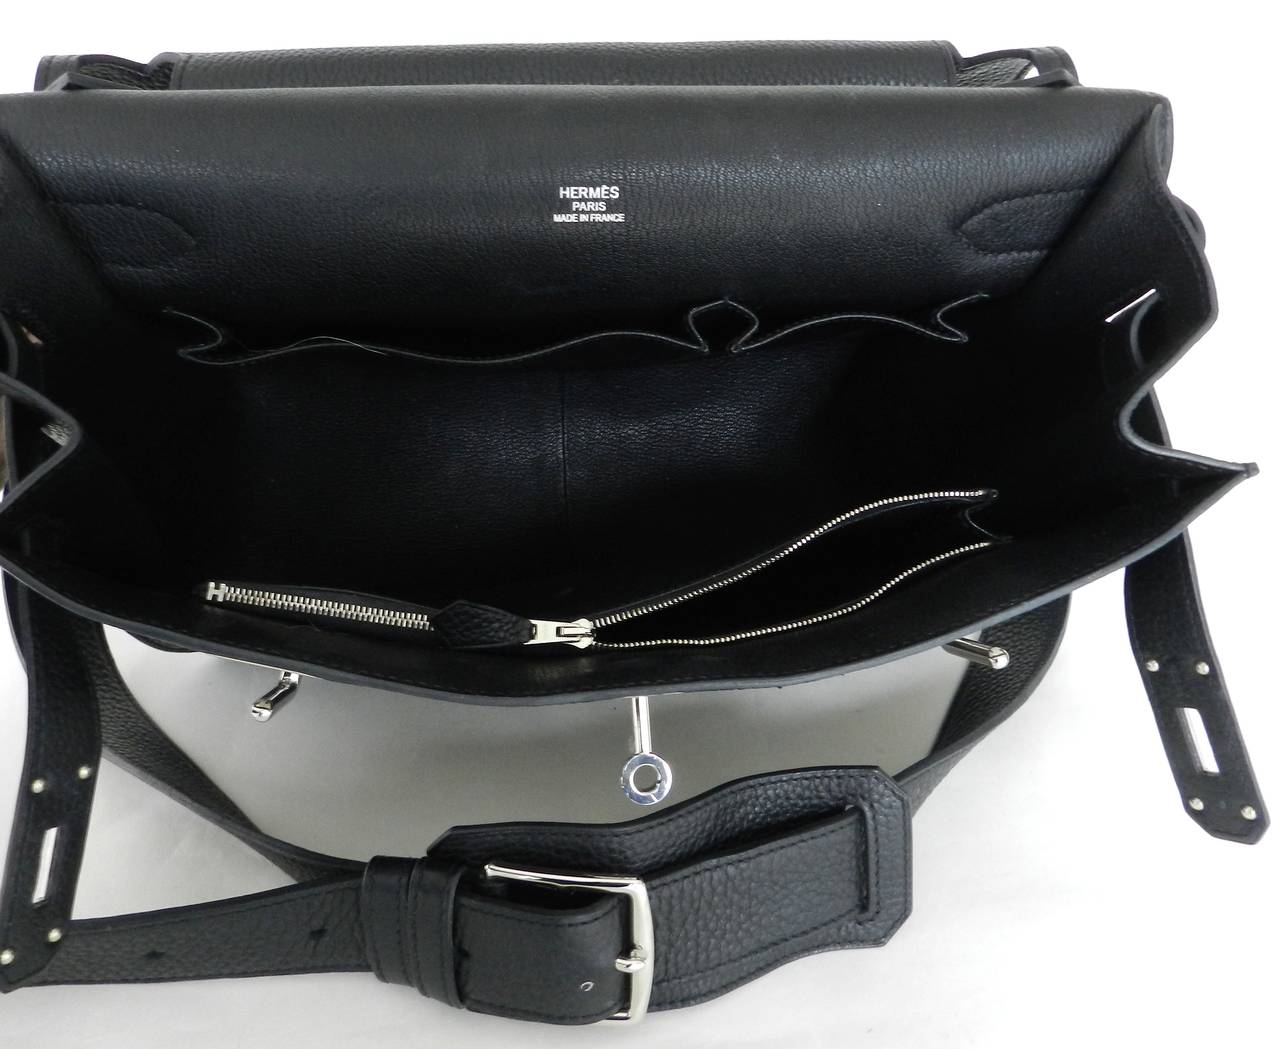 Hermes Jipsiere Gypsy Messenger Bag 34 cm - Black / Silver In Excellent Condition In Toronto, ON